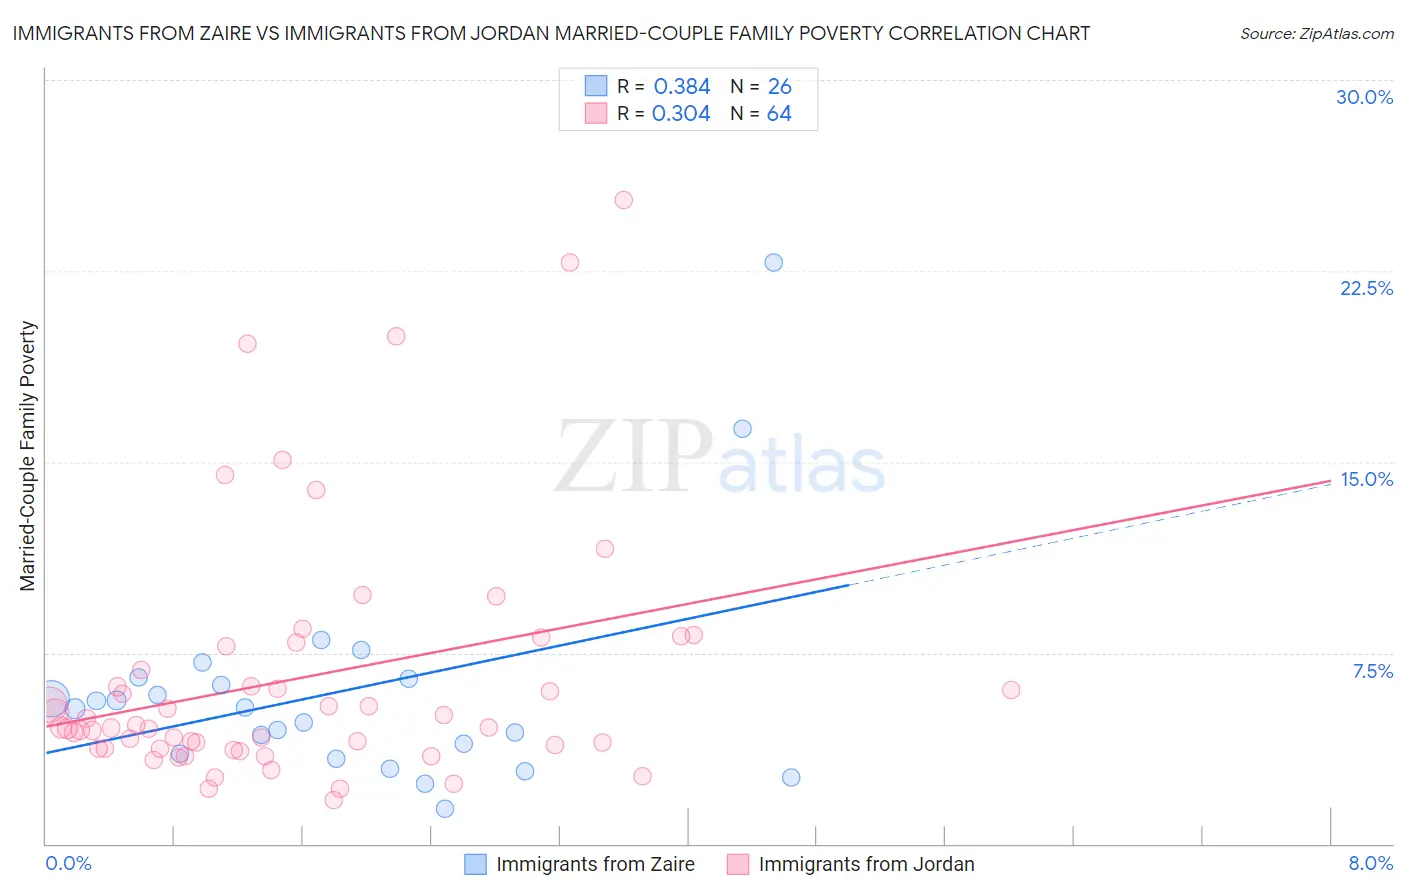 Immigrants from Zaire vs Immigrants from Jordan Married-Couple Family Poverty